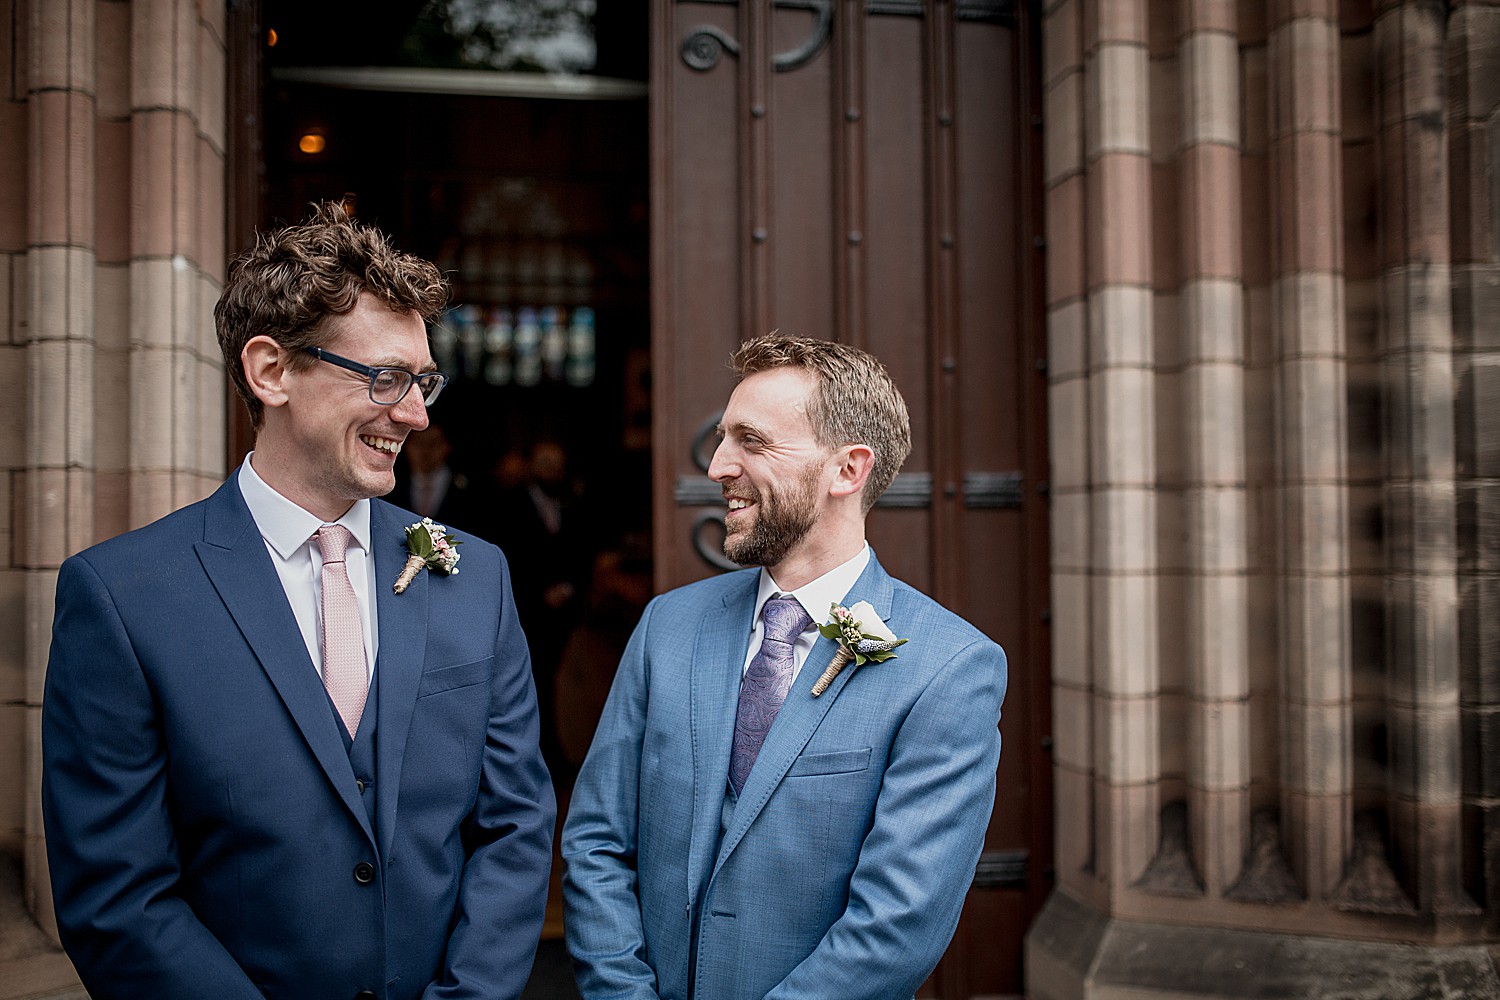 Groom and best man outside church